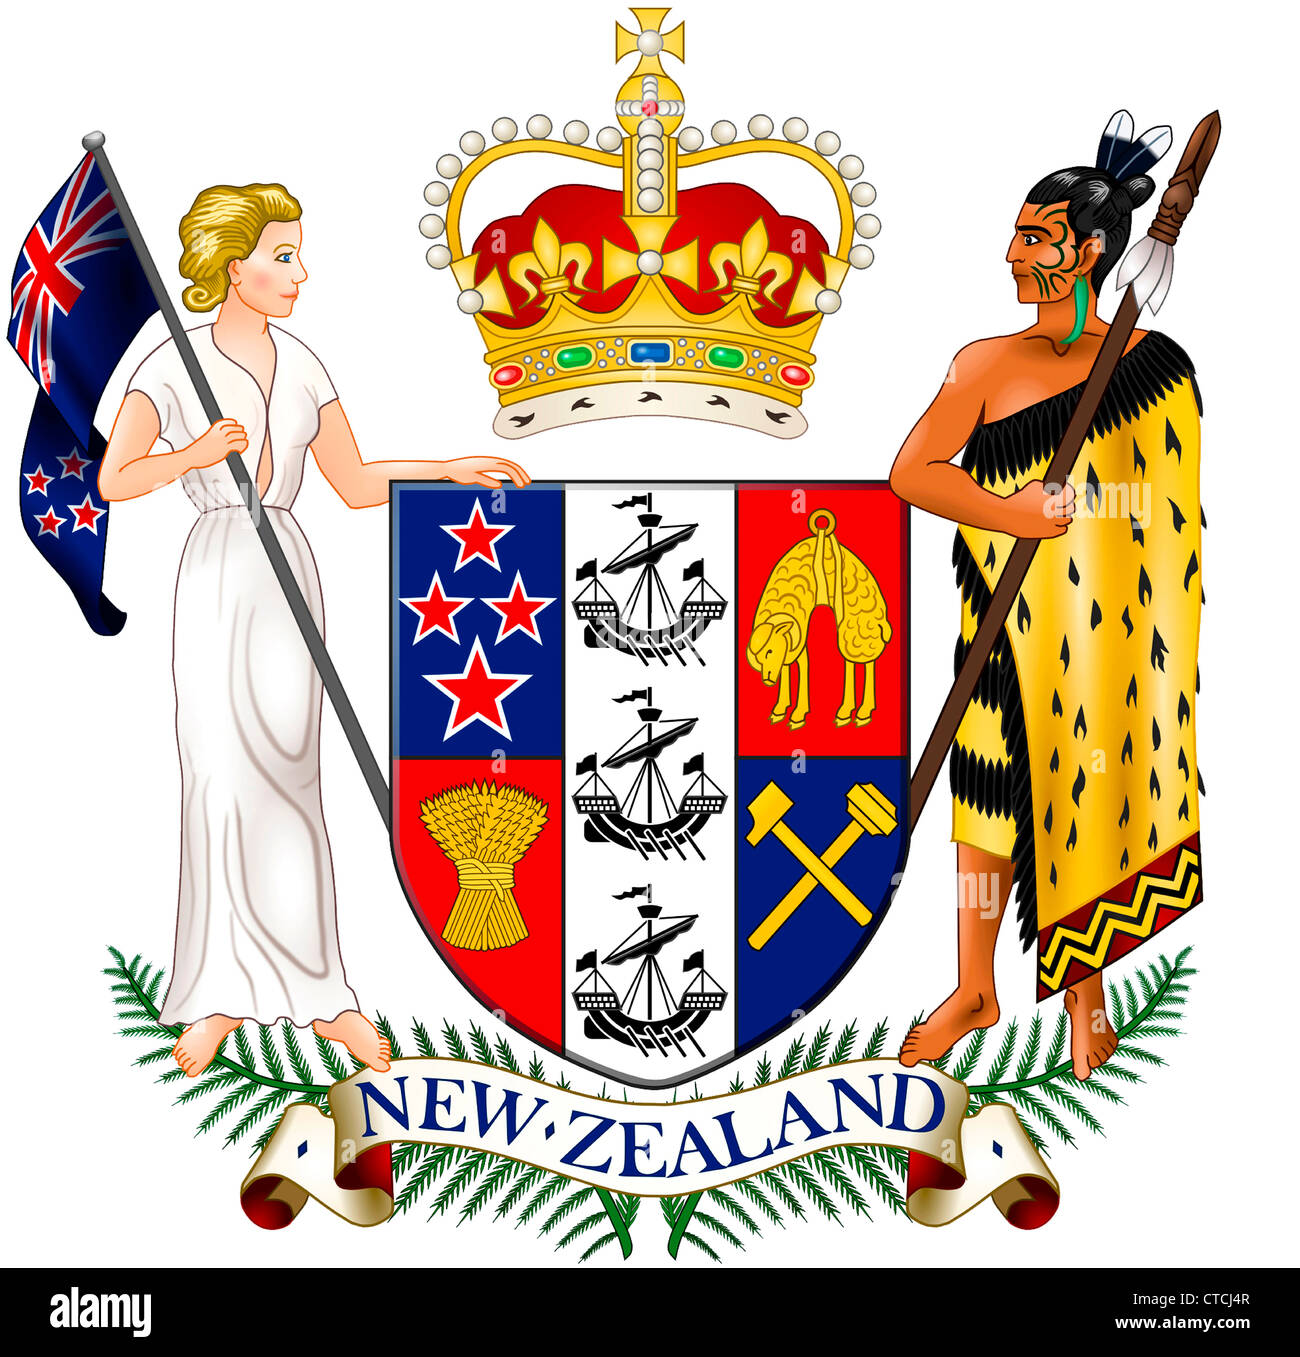 Coat of arms of New Zealand. Stock Photo